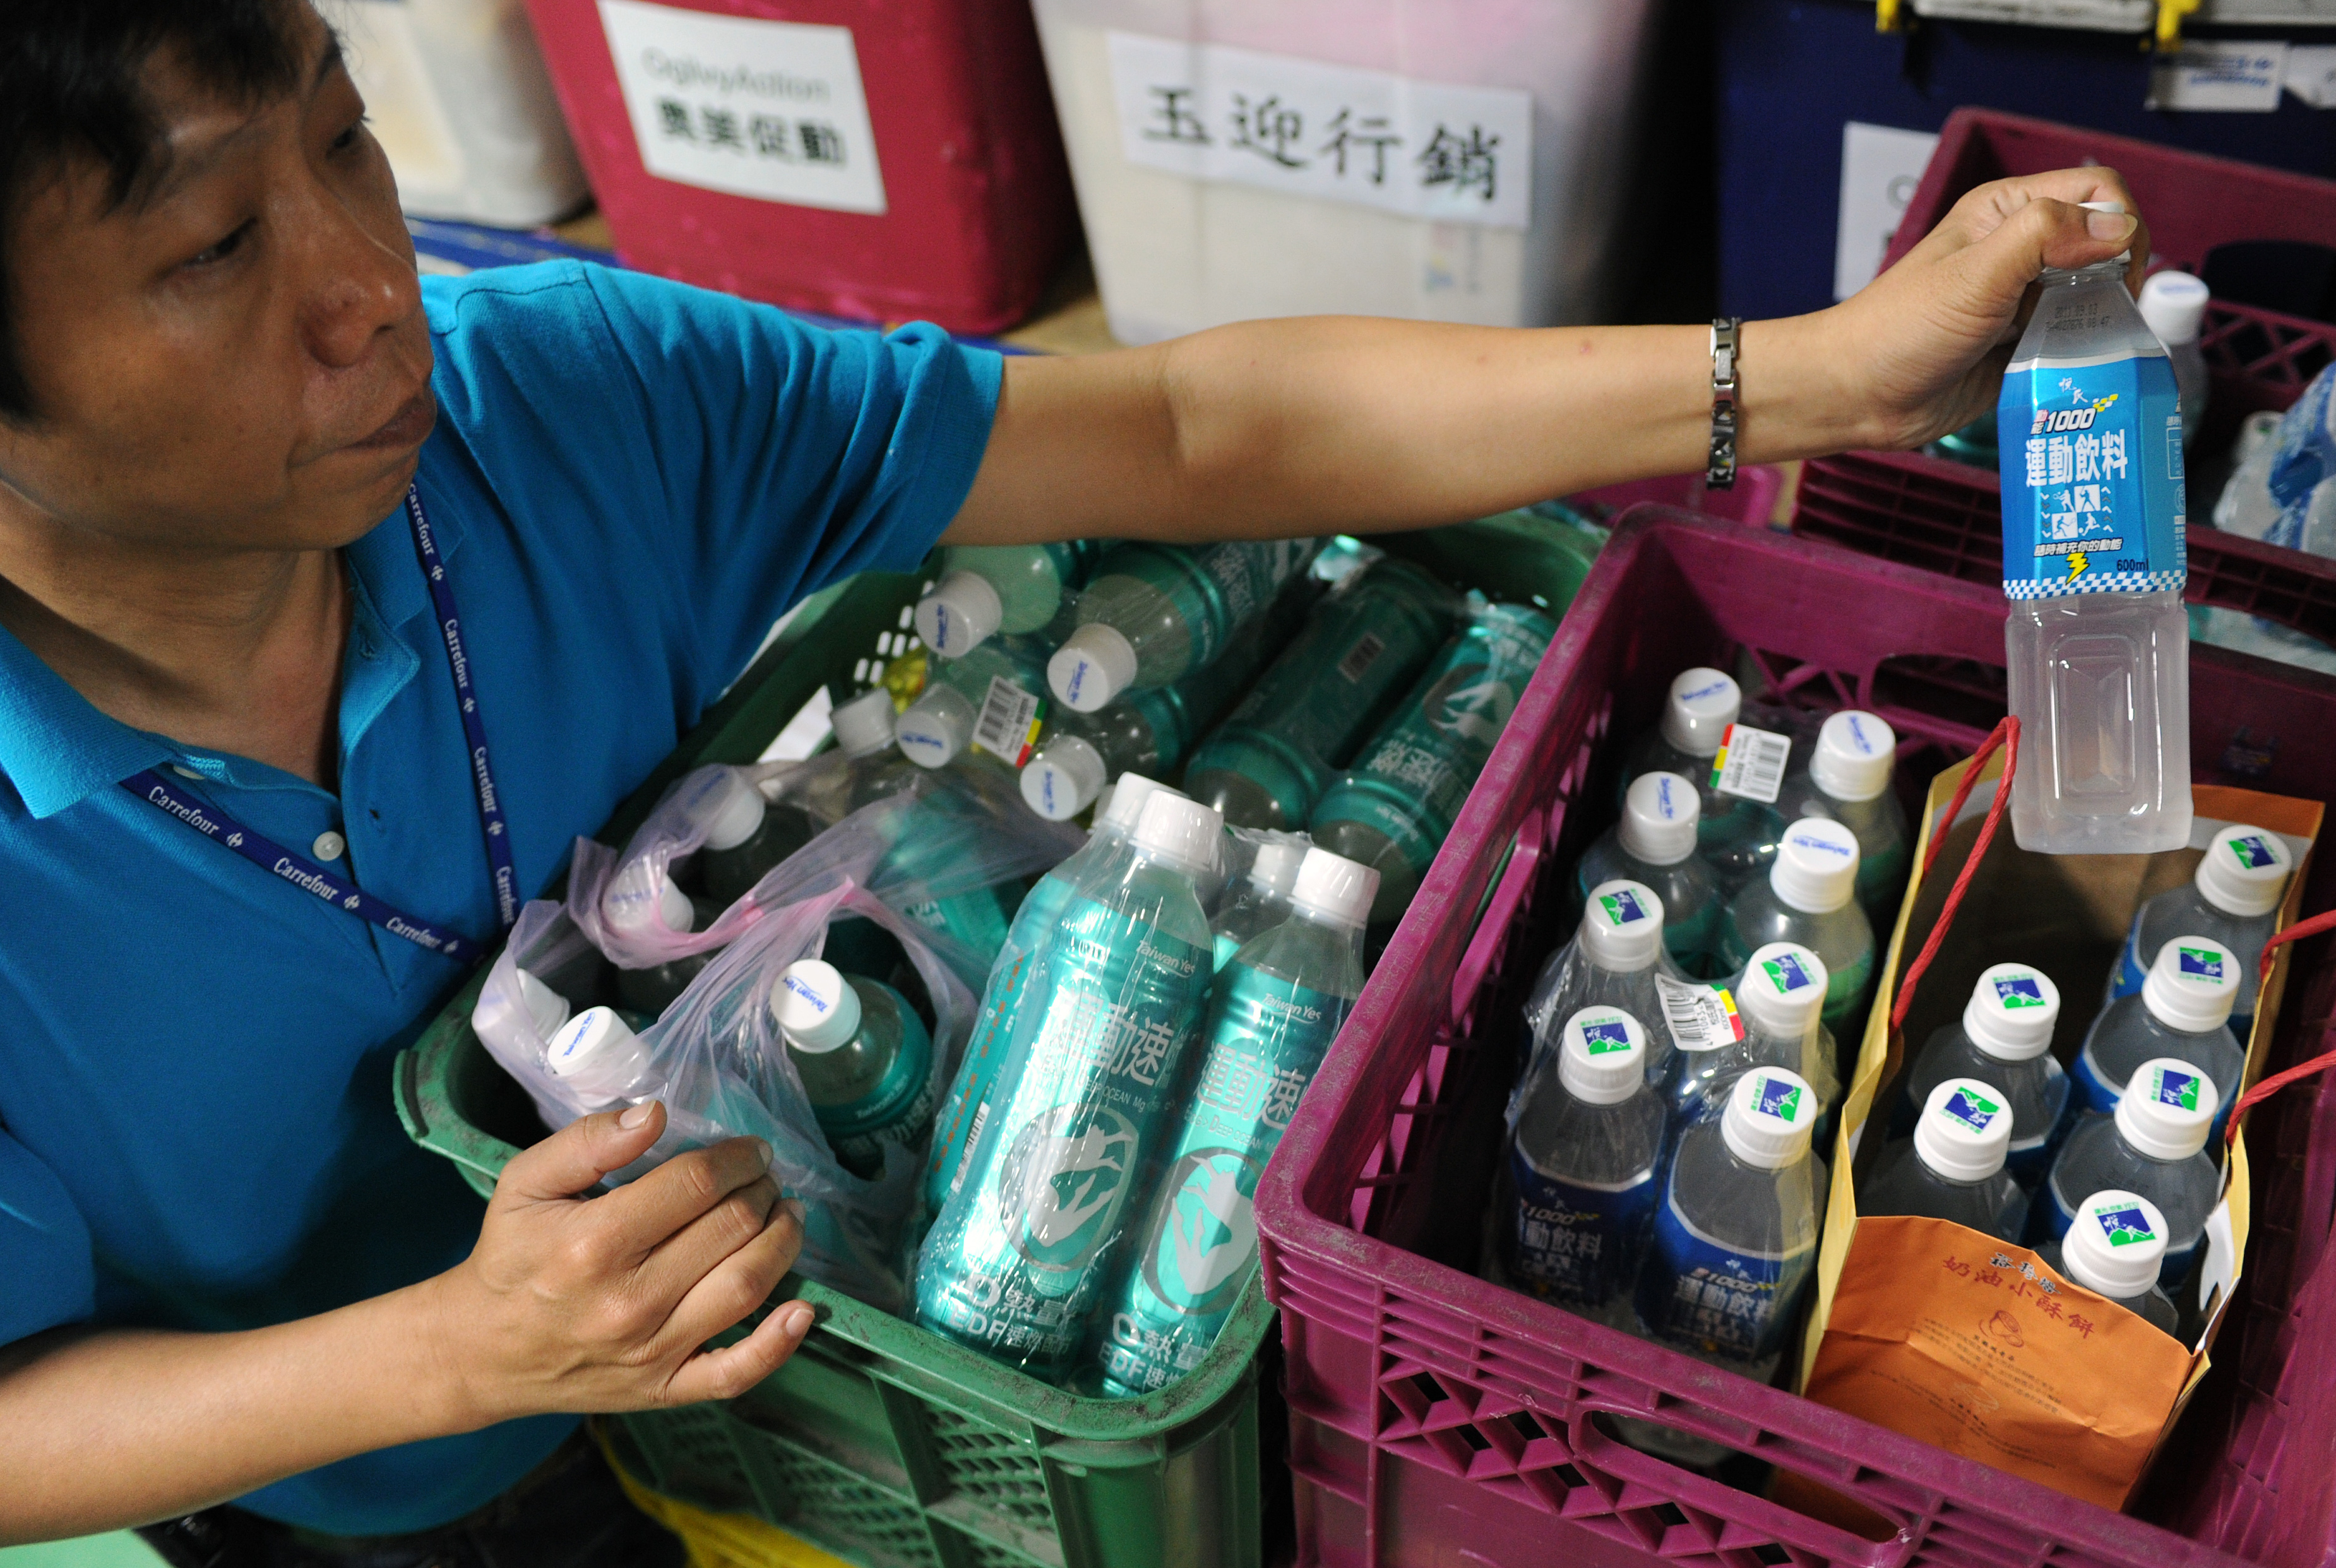 A worker displays a sports drinks containing a platicizer called DEHP after removing at a supermarket in Taiwan in 2011. (SAM YEH—AFP/Getty Images)